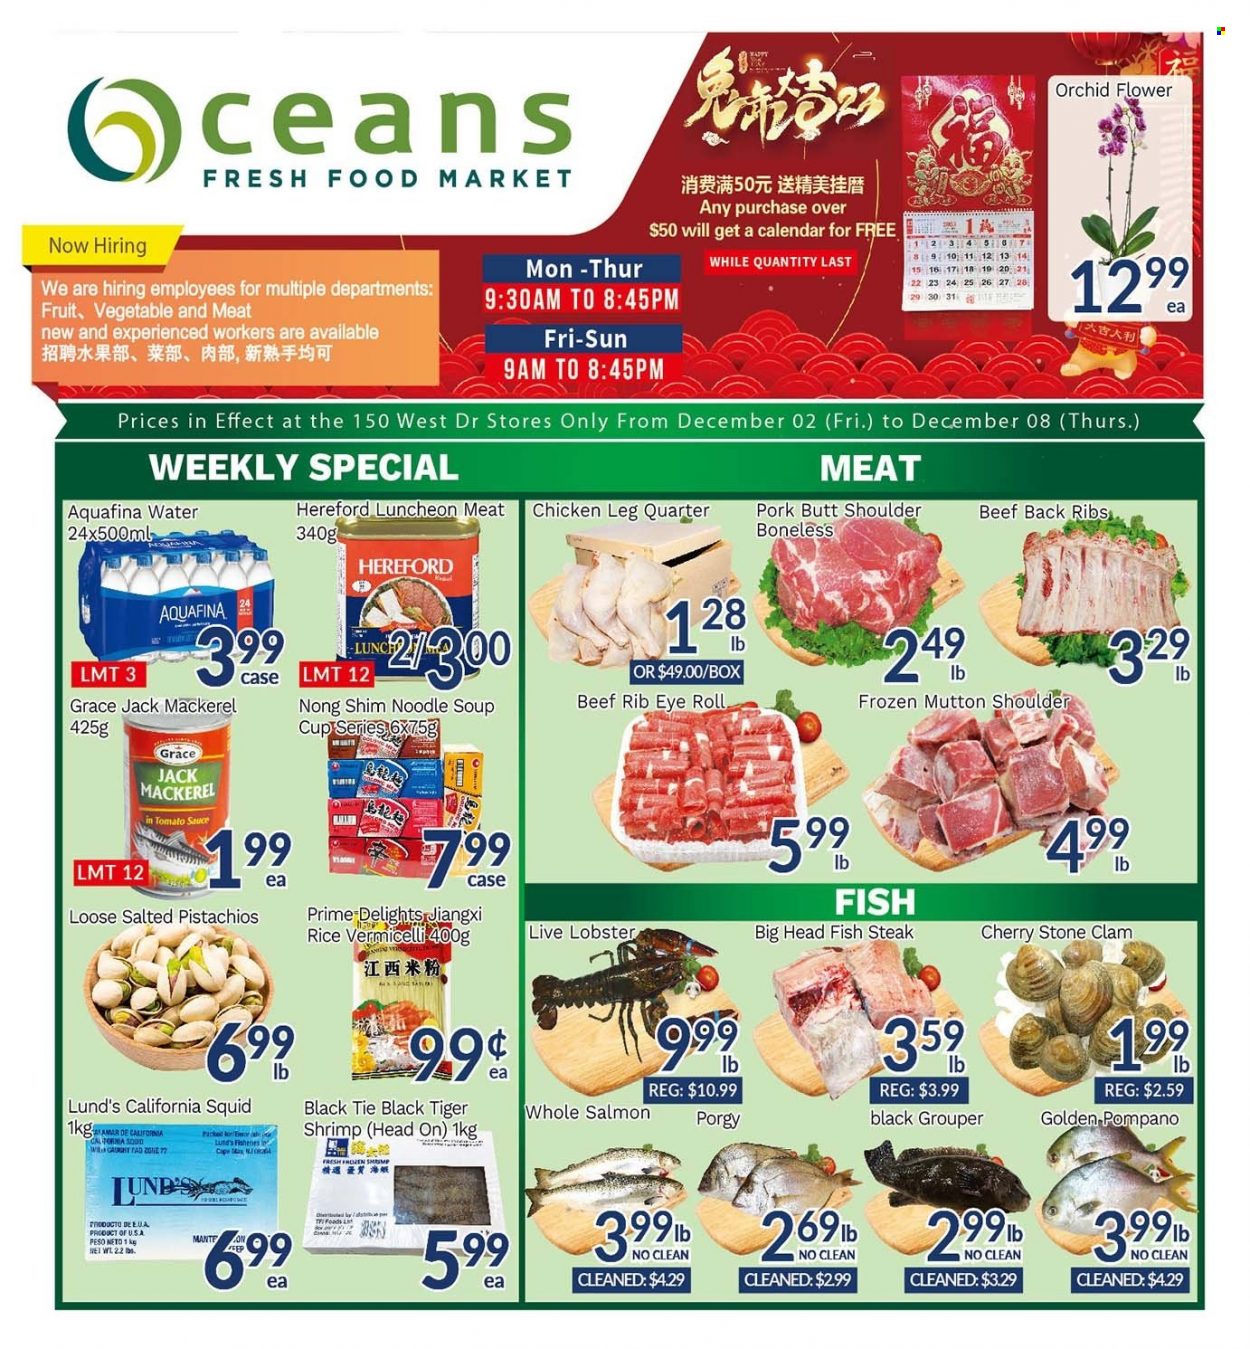 thumbnail - Oceans Flyer - December 02, 2022 - December 08, 2022 - Sales products - cherries, clams, grouper, lobster, mackerel, salmon, squid, pompano, fish, shrimps, fish steak, soup, noodles cup, noodles, lunch meat, rice, rice vermicelli, pistachios, Aquafina, chicken legs, beef meat, mutton meat, steak. Page 1.